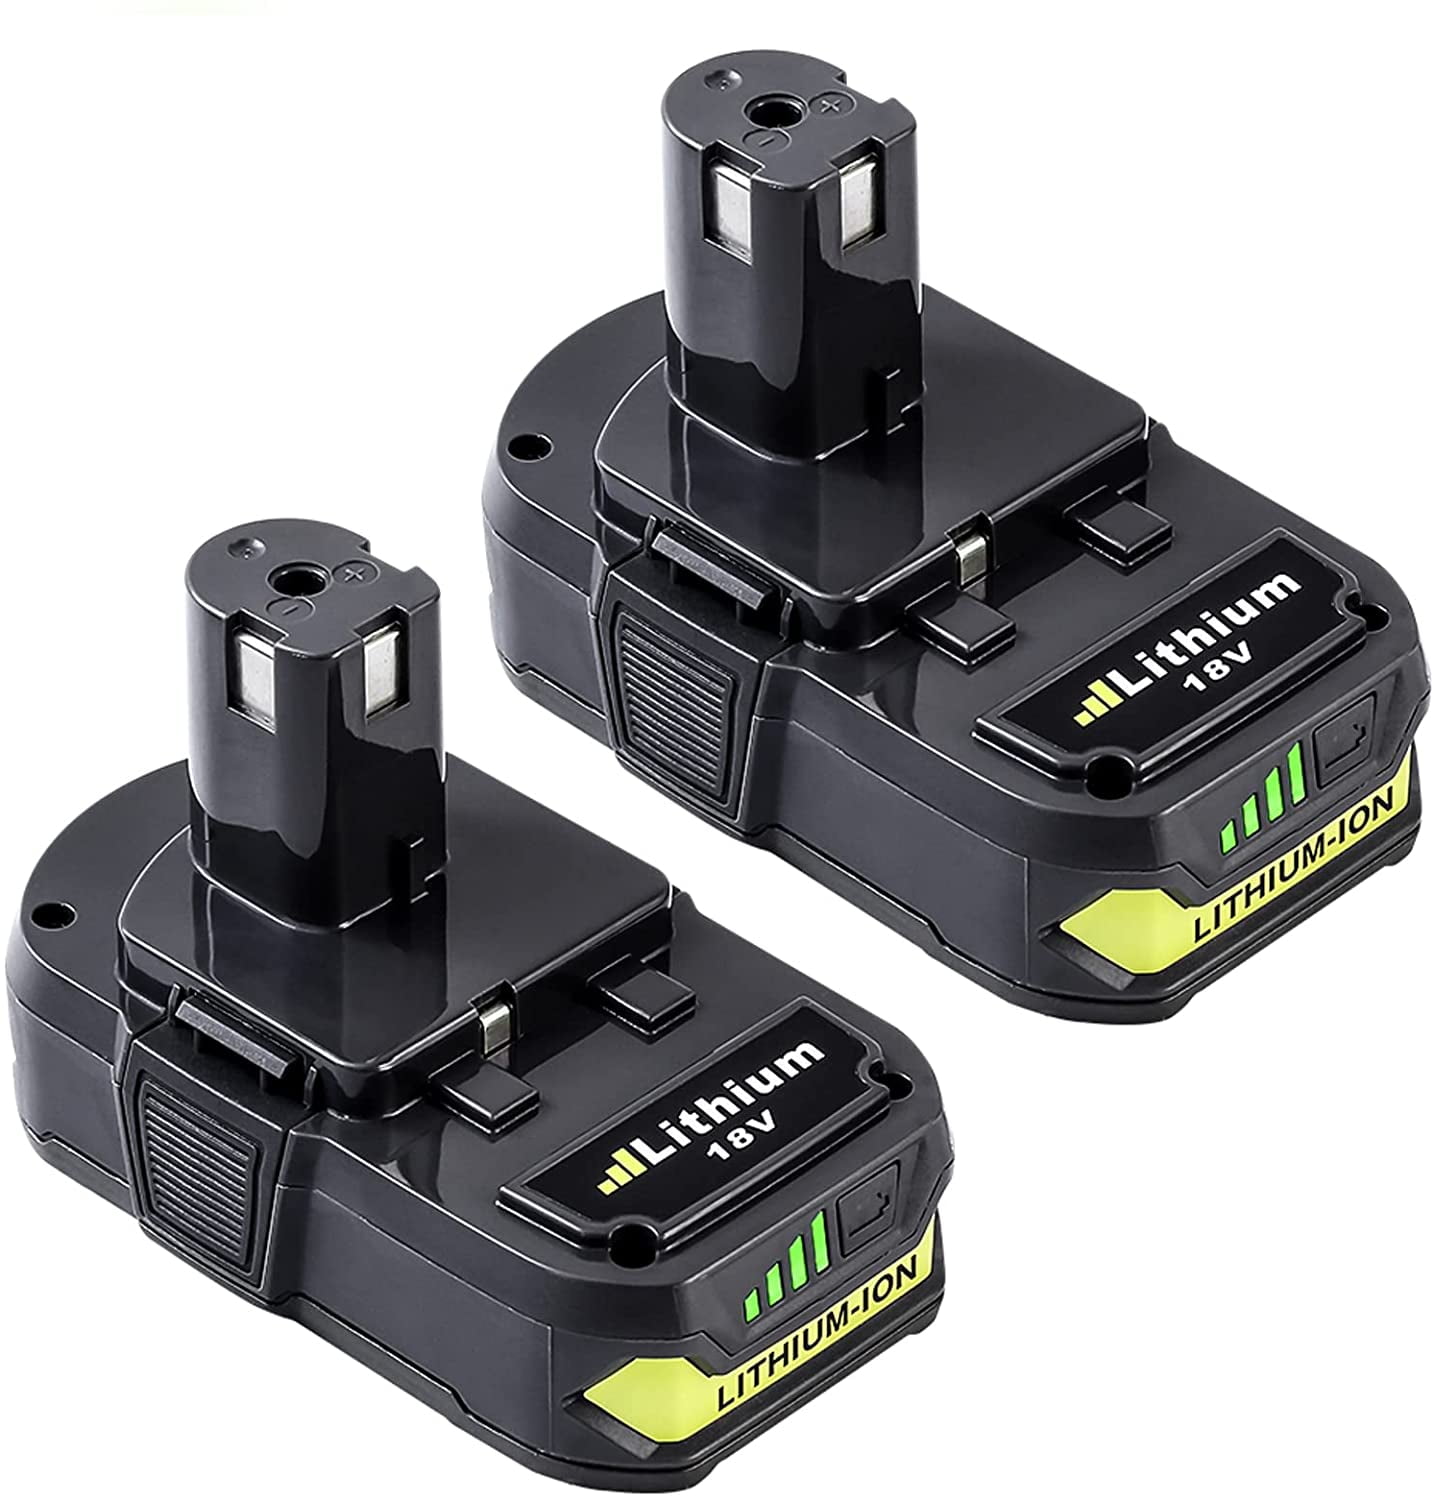 2Packs P102 3.0Ah Replacement for Ryobi 18V Lithium-Ion Battery P102 P103 P104 P105 P107 P108 P109 P122 for 18-Volt Power Tool, Black